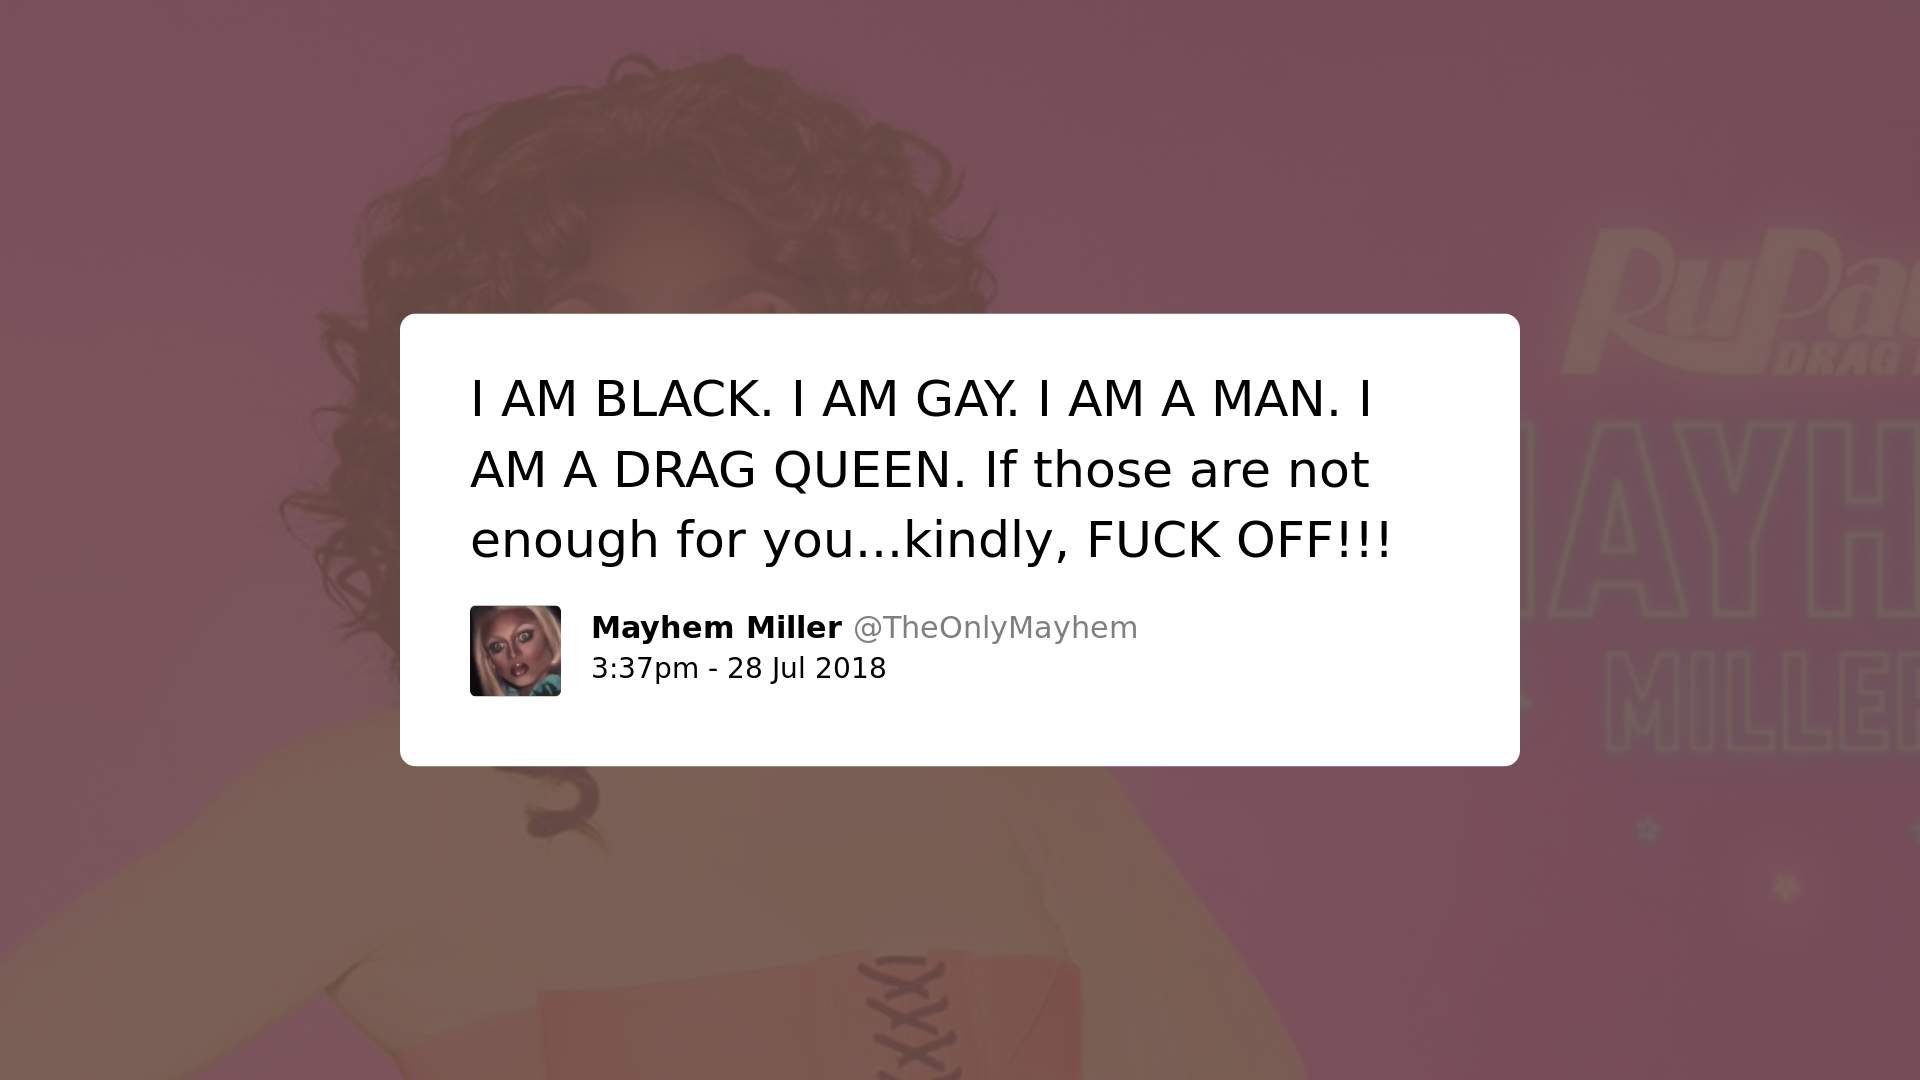 Print screen of a post by Mayhem Miller with the text:  I AM BLACK. I AM GAY. I AM A MAN. I AM A DRAG QUEEN. If those are not enough for you... kindly, FUCK OFF!!!. 